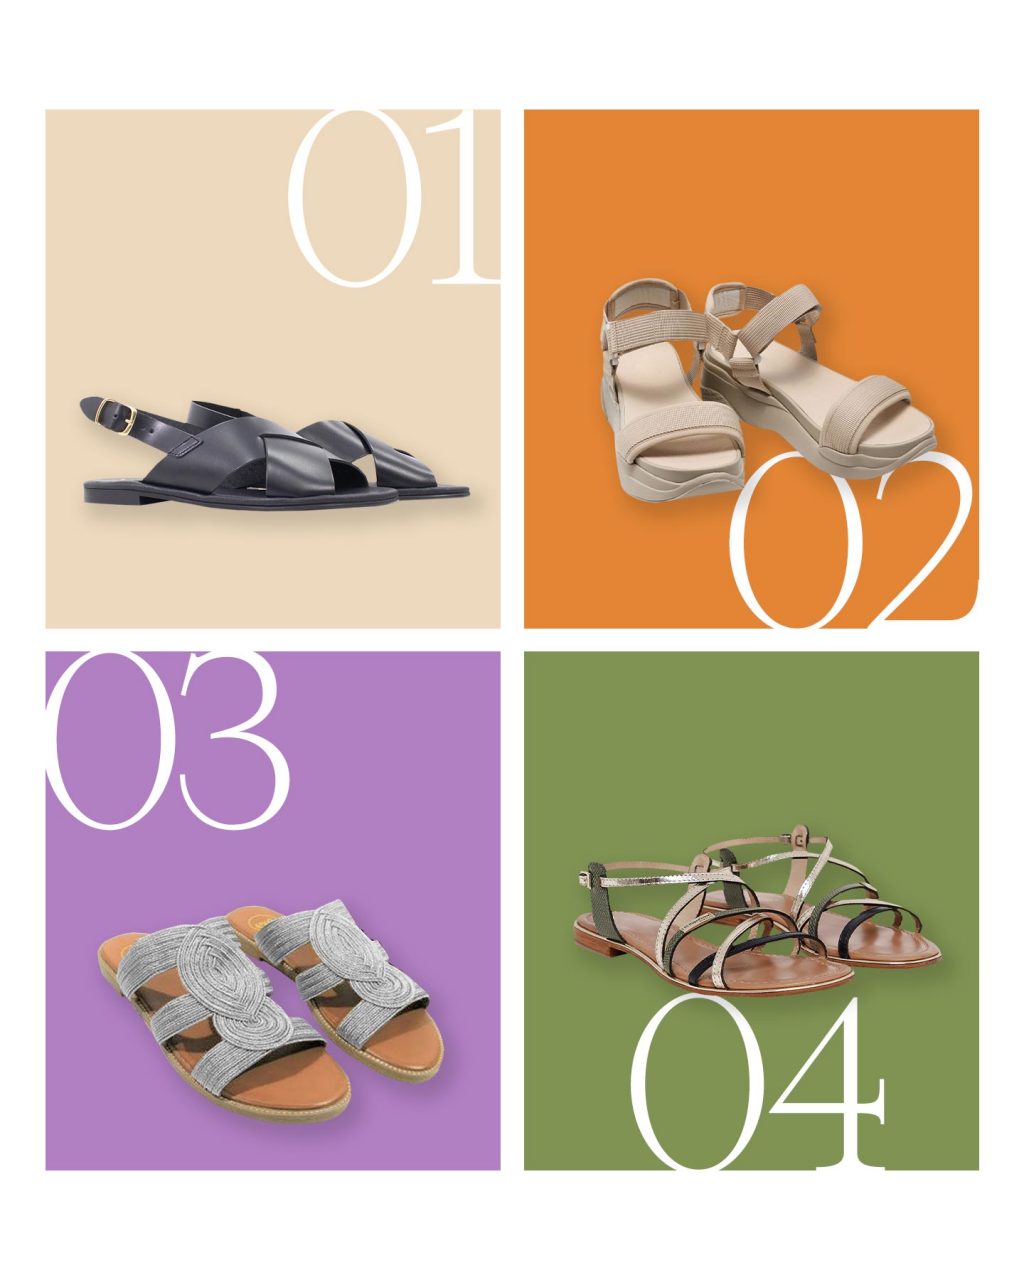 35+ Different Types Of Sandals To Wear | The Ultimate List-sgquangbinhtourist.com.vn